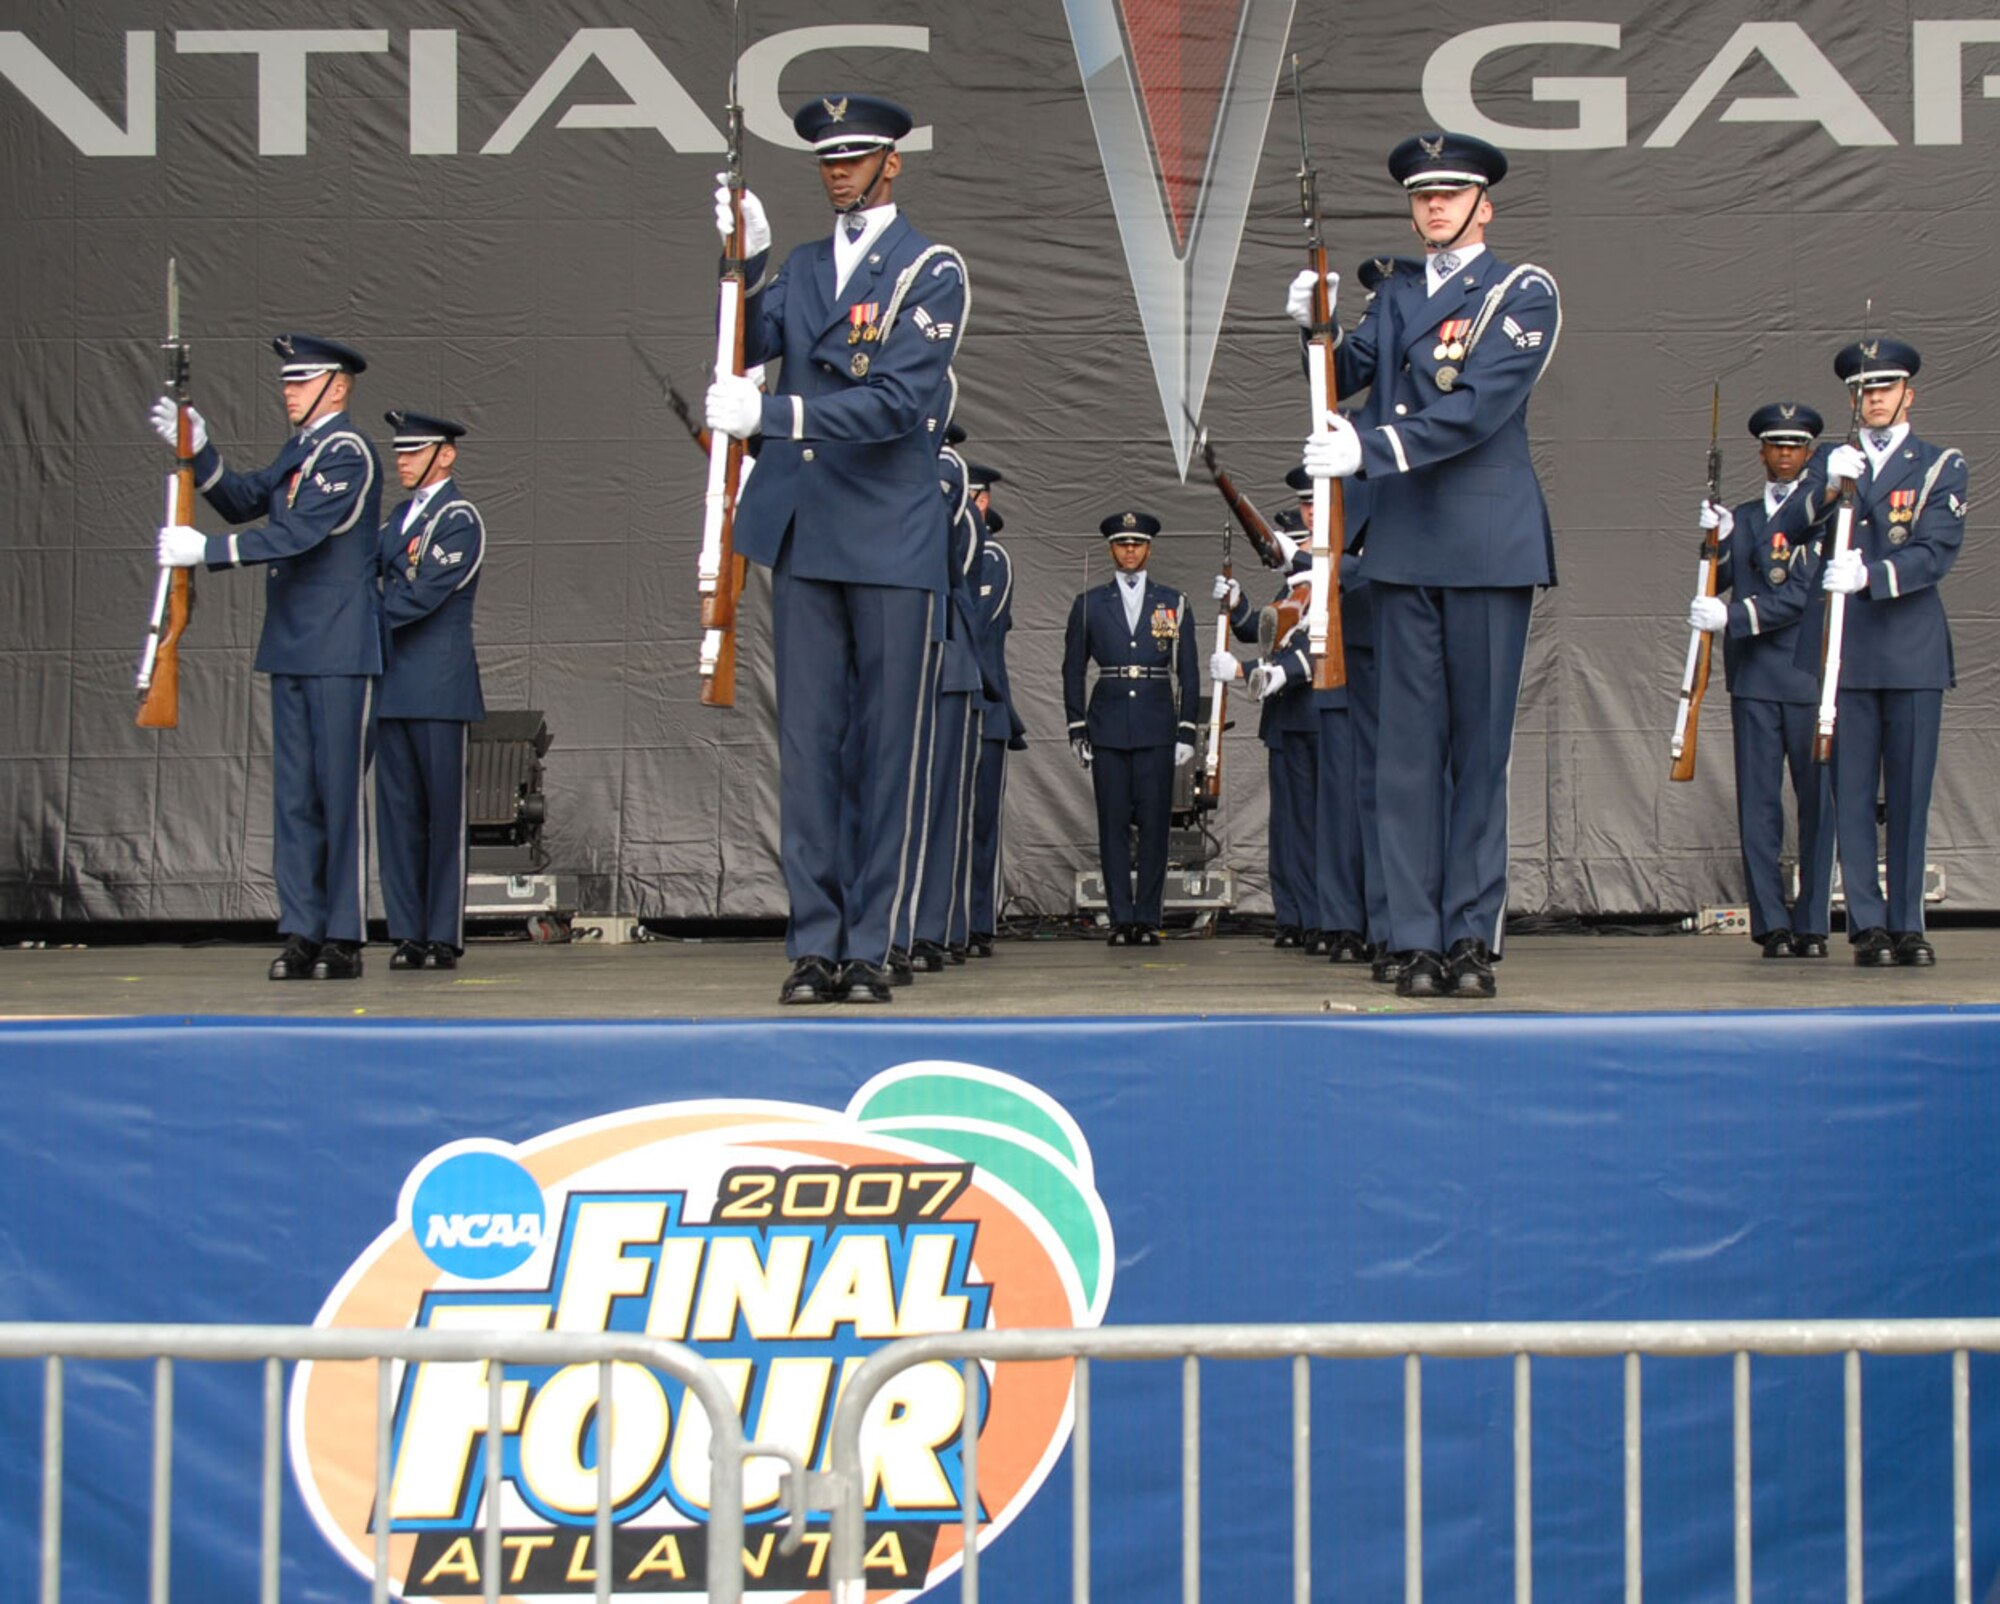 ATLANTA -- Air Force Honor Guard Drill Team members perform at the opening ceremonies for the NCAA Final Four Games March 31 at Centennial Olympic Park.The Air Force Honor Guard Drill Team was invited to perform for various ceremonies associated with the NCAA Final Four events March 31 - April 2, including Hoop City, an interactive experience for basketball fans.